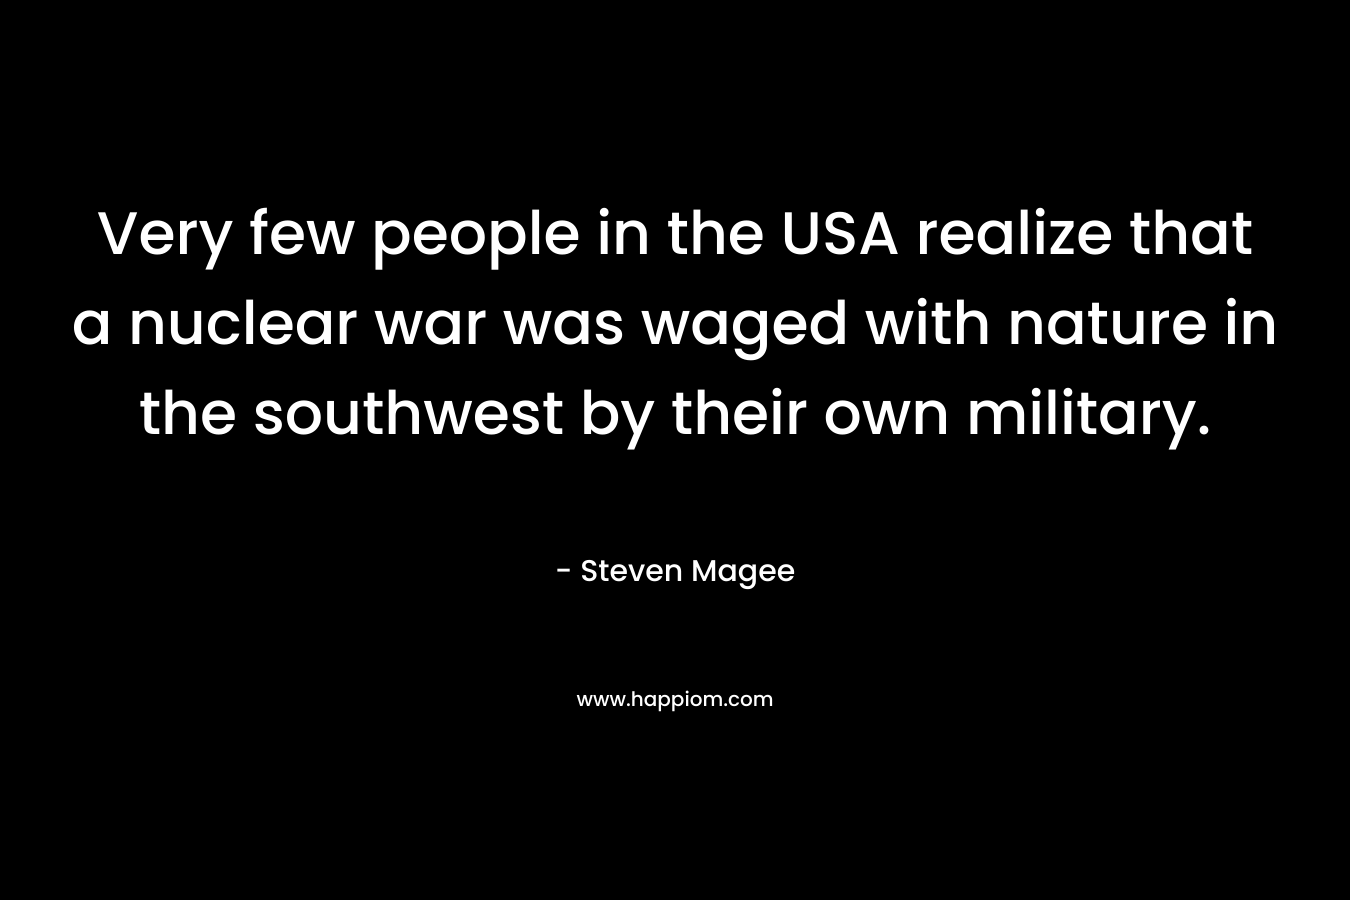 Very few people in the USA realize that a nuclear war was waged with nature in the southwest by their own military.